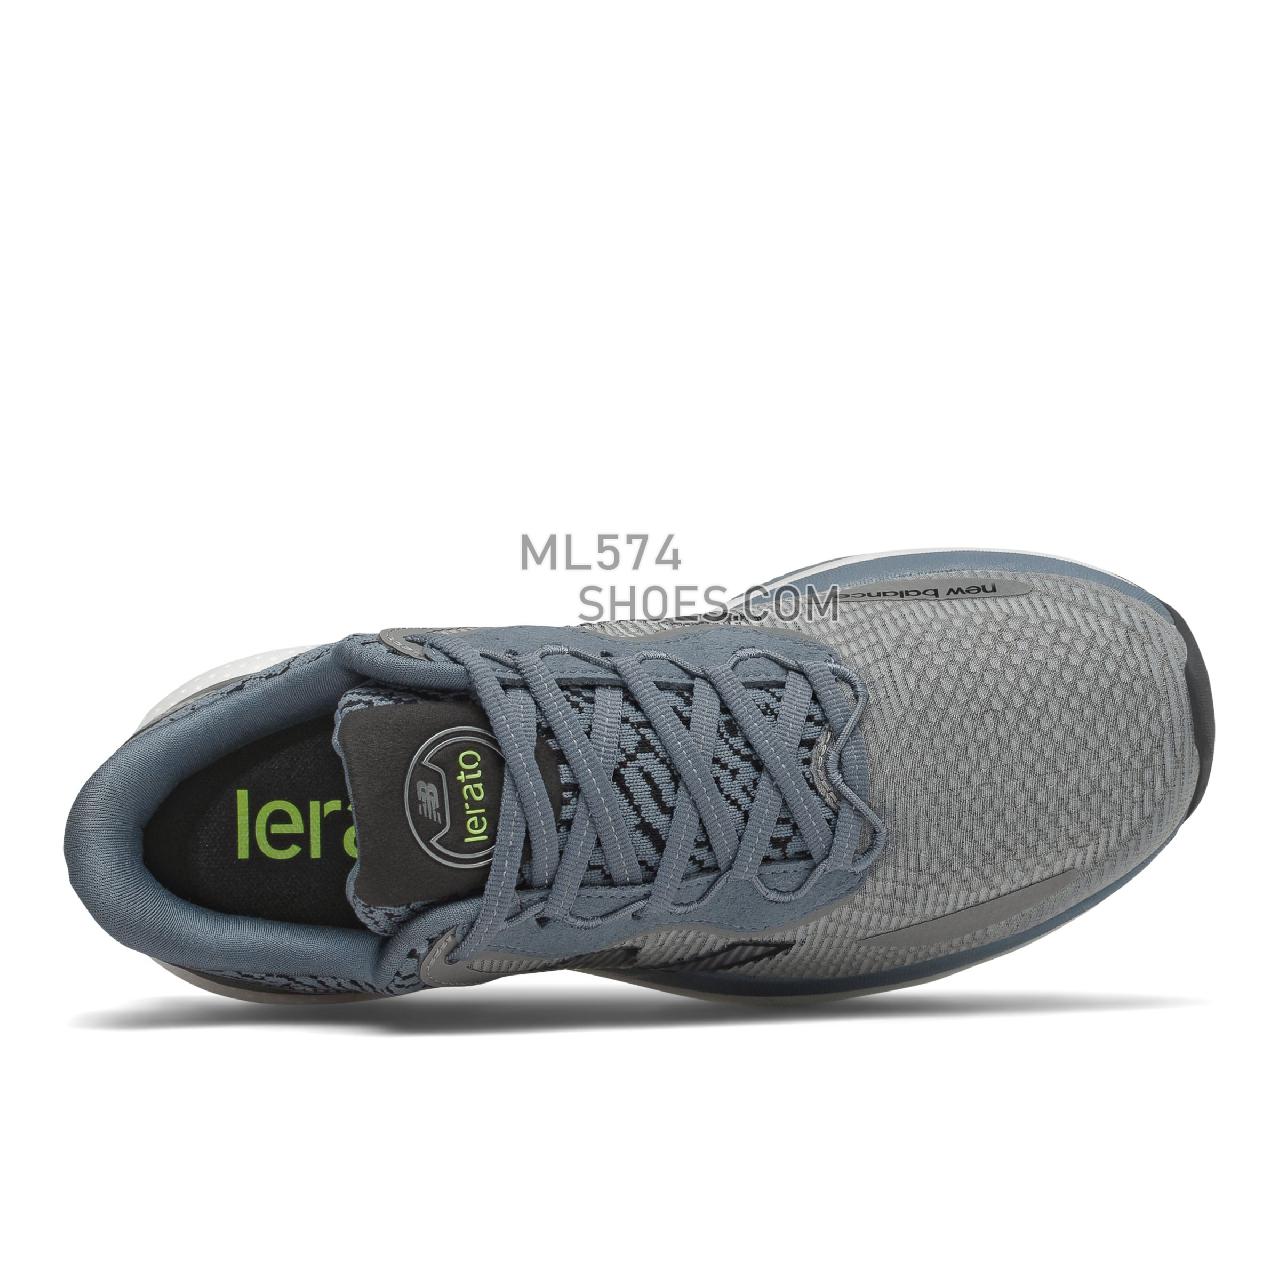 New Balance Lerato - Women's Neutral Running - Grey with Bleached Lime Glo - WLERAGG